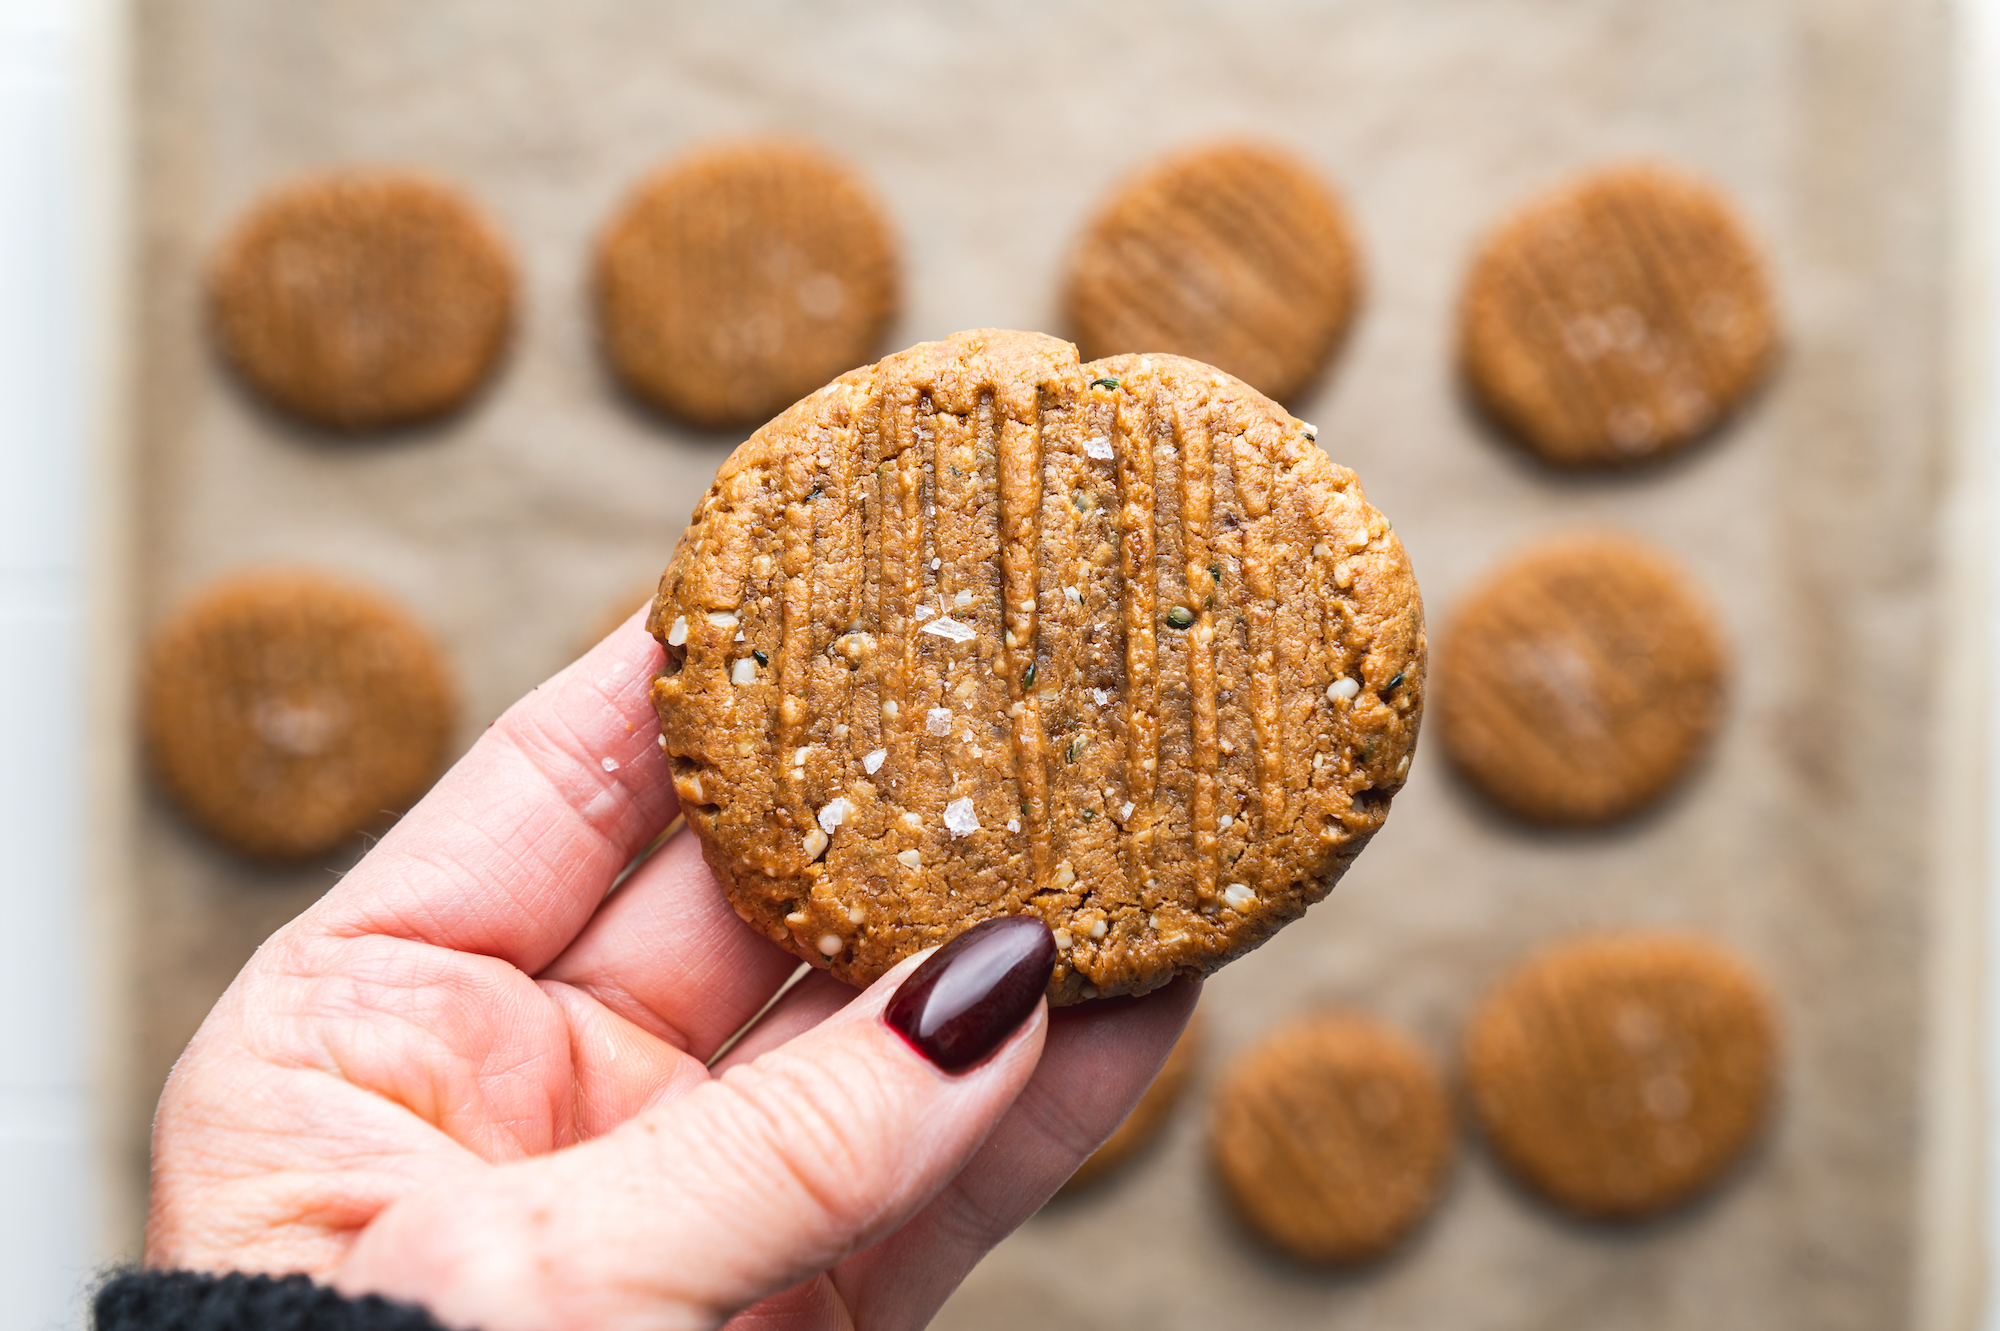 hand holding a raw peanut butter cookie with seeds and sea salt flakes by teri-ann carty